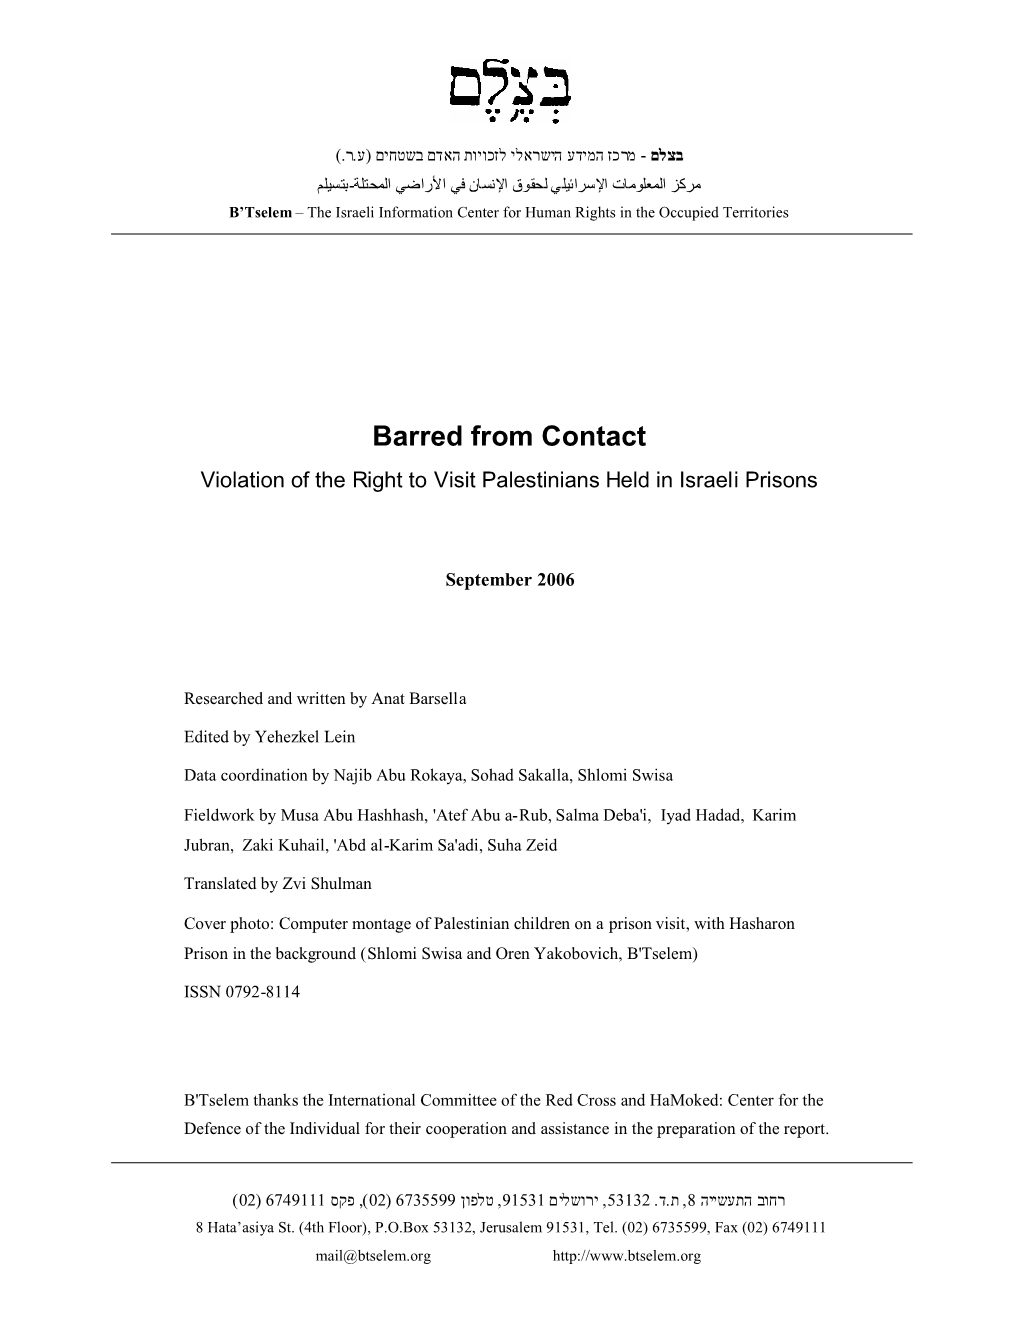 Barred from Contact Violation of the Right to Visit Palestinians Held in Israeli Prisons